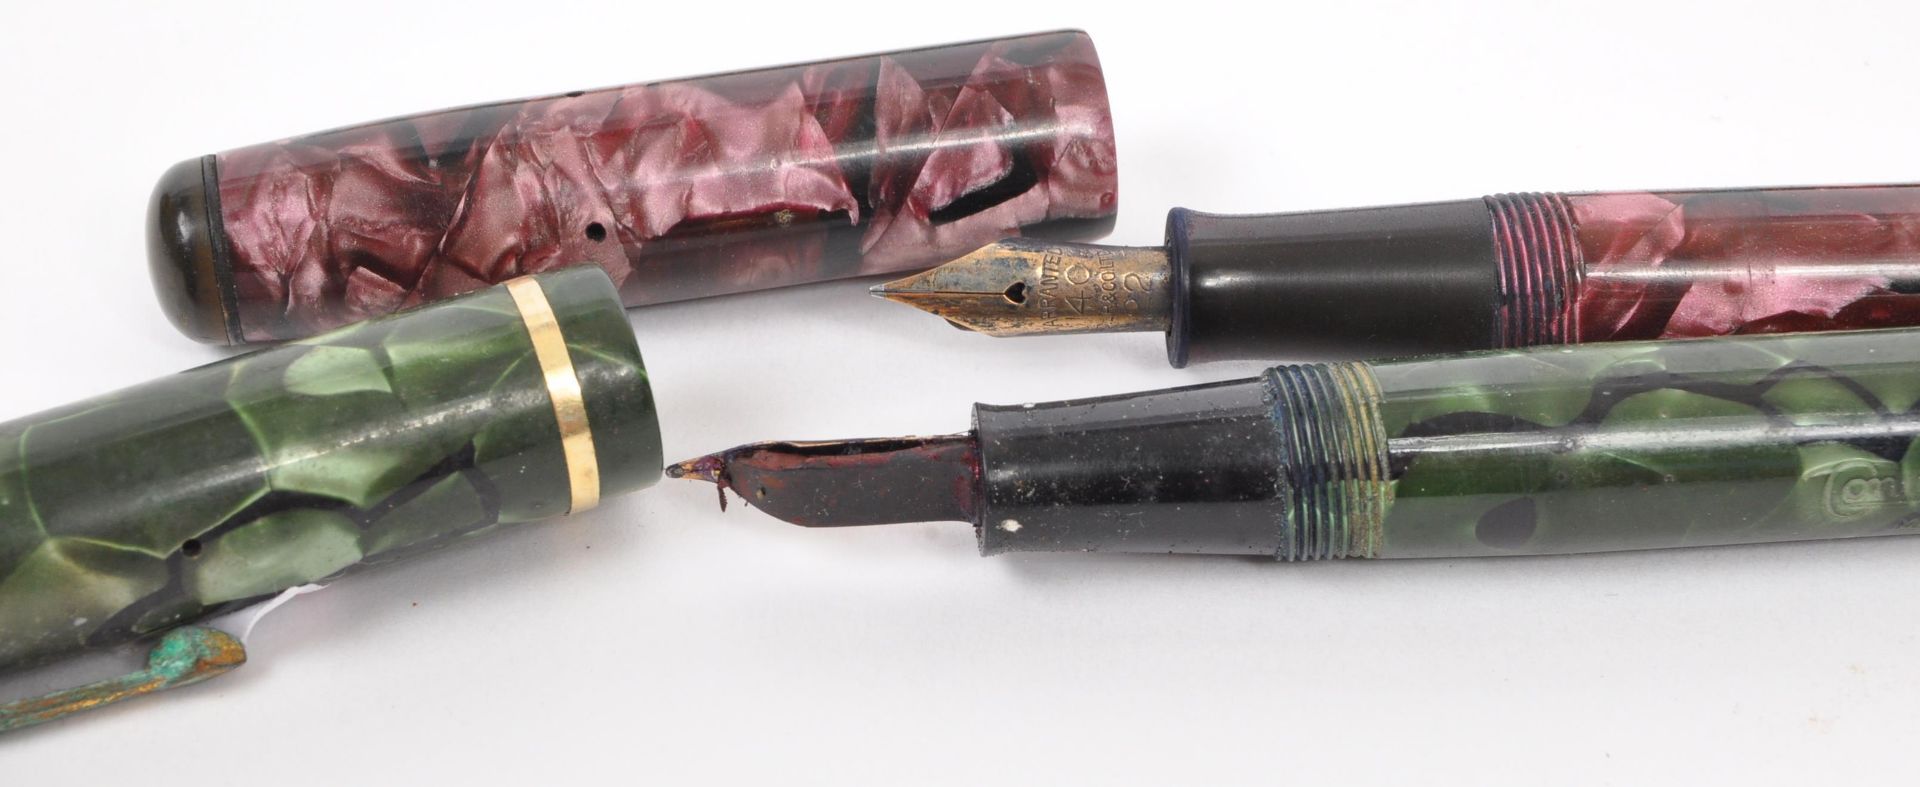 COLLECTION OF VINTAGE FOUNTAIN WRITING DESK PENS - Image 6 of 6